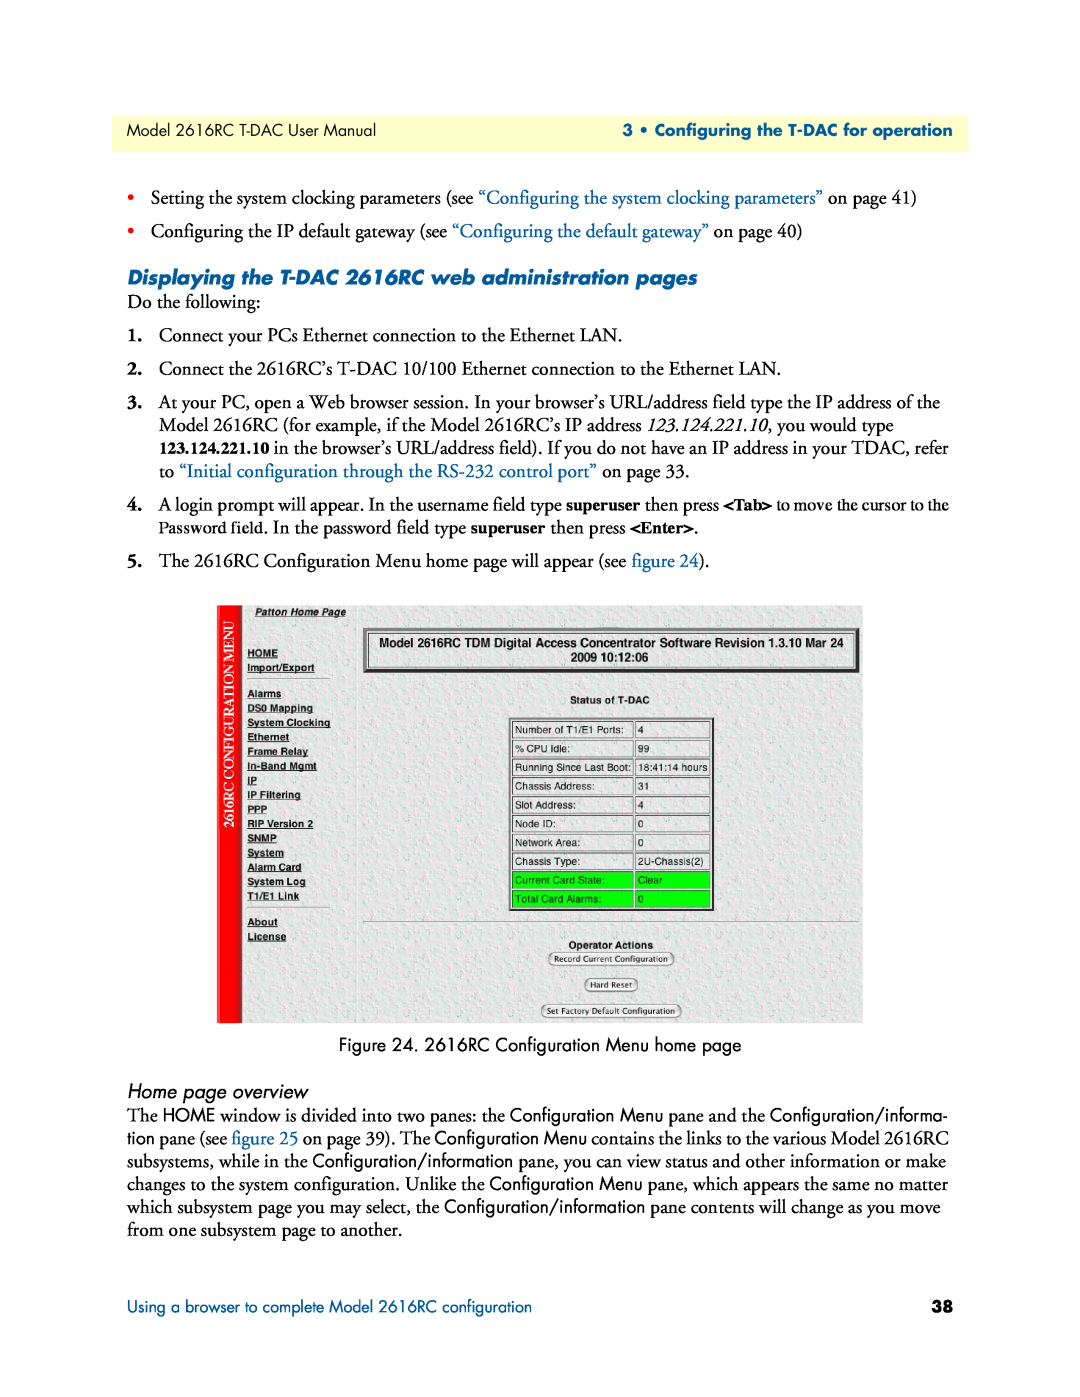 Patton electronic user manual Displaying the T-DAC 2616RC web administration pages, Home page overview 